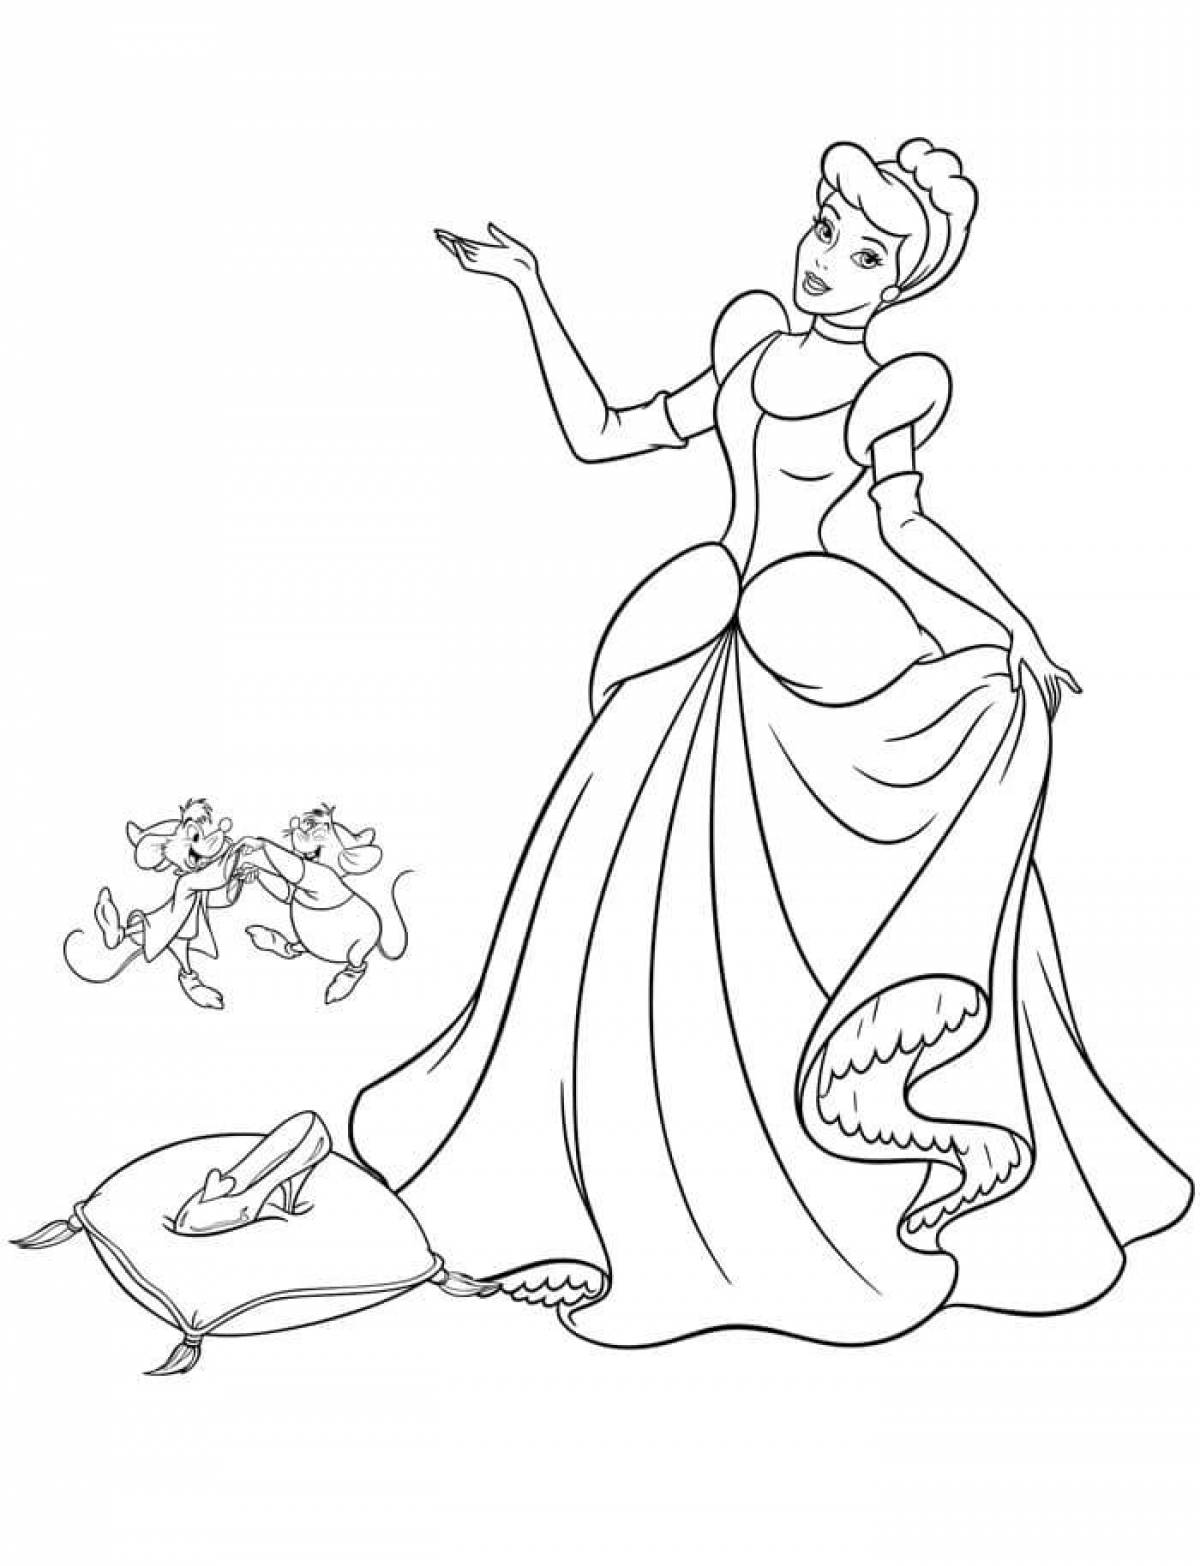 Live Cinderella coloring pages for kids